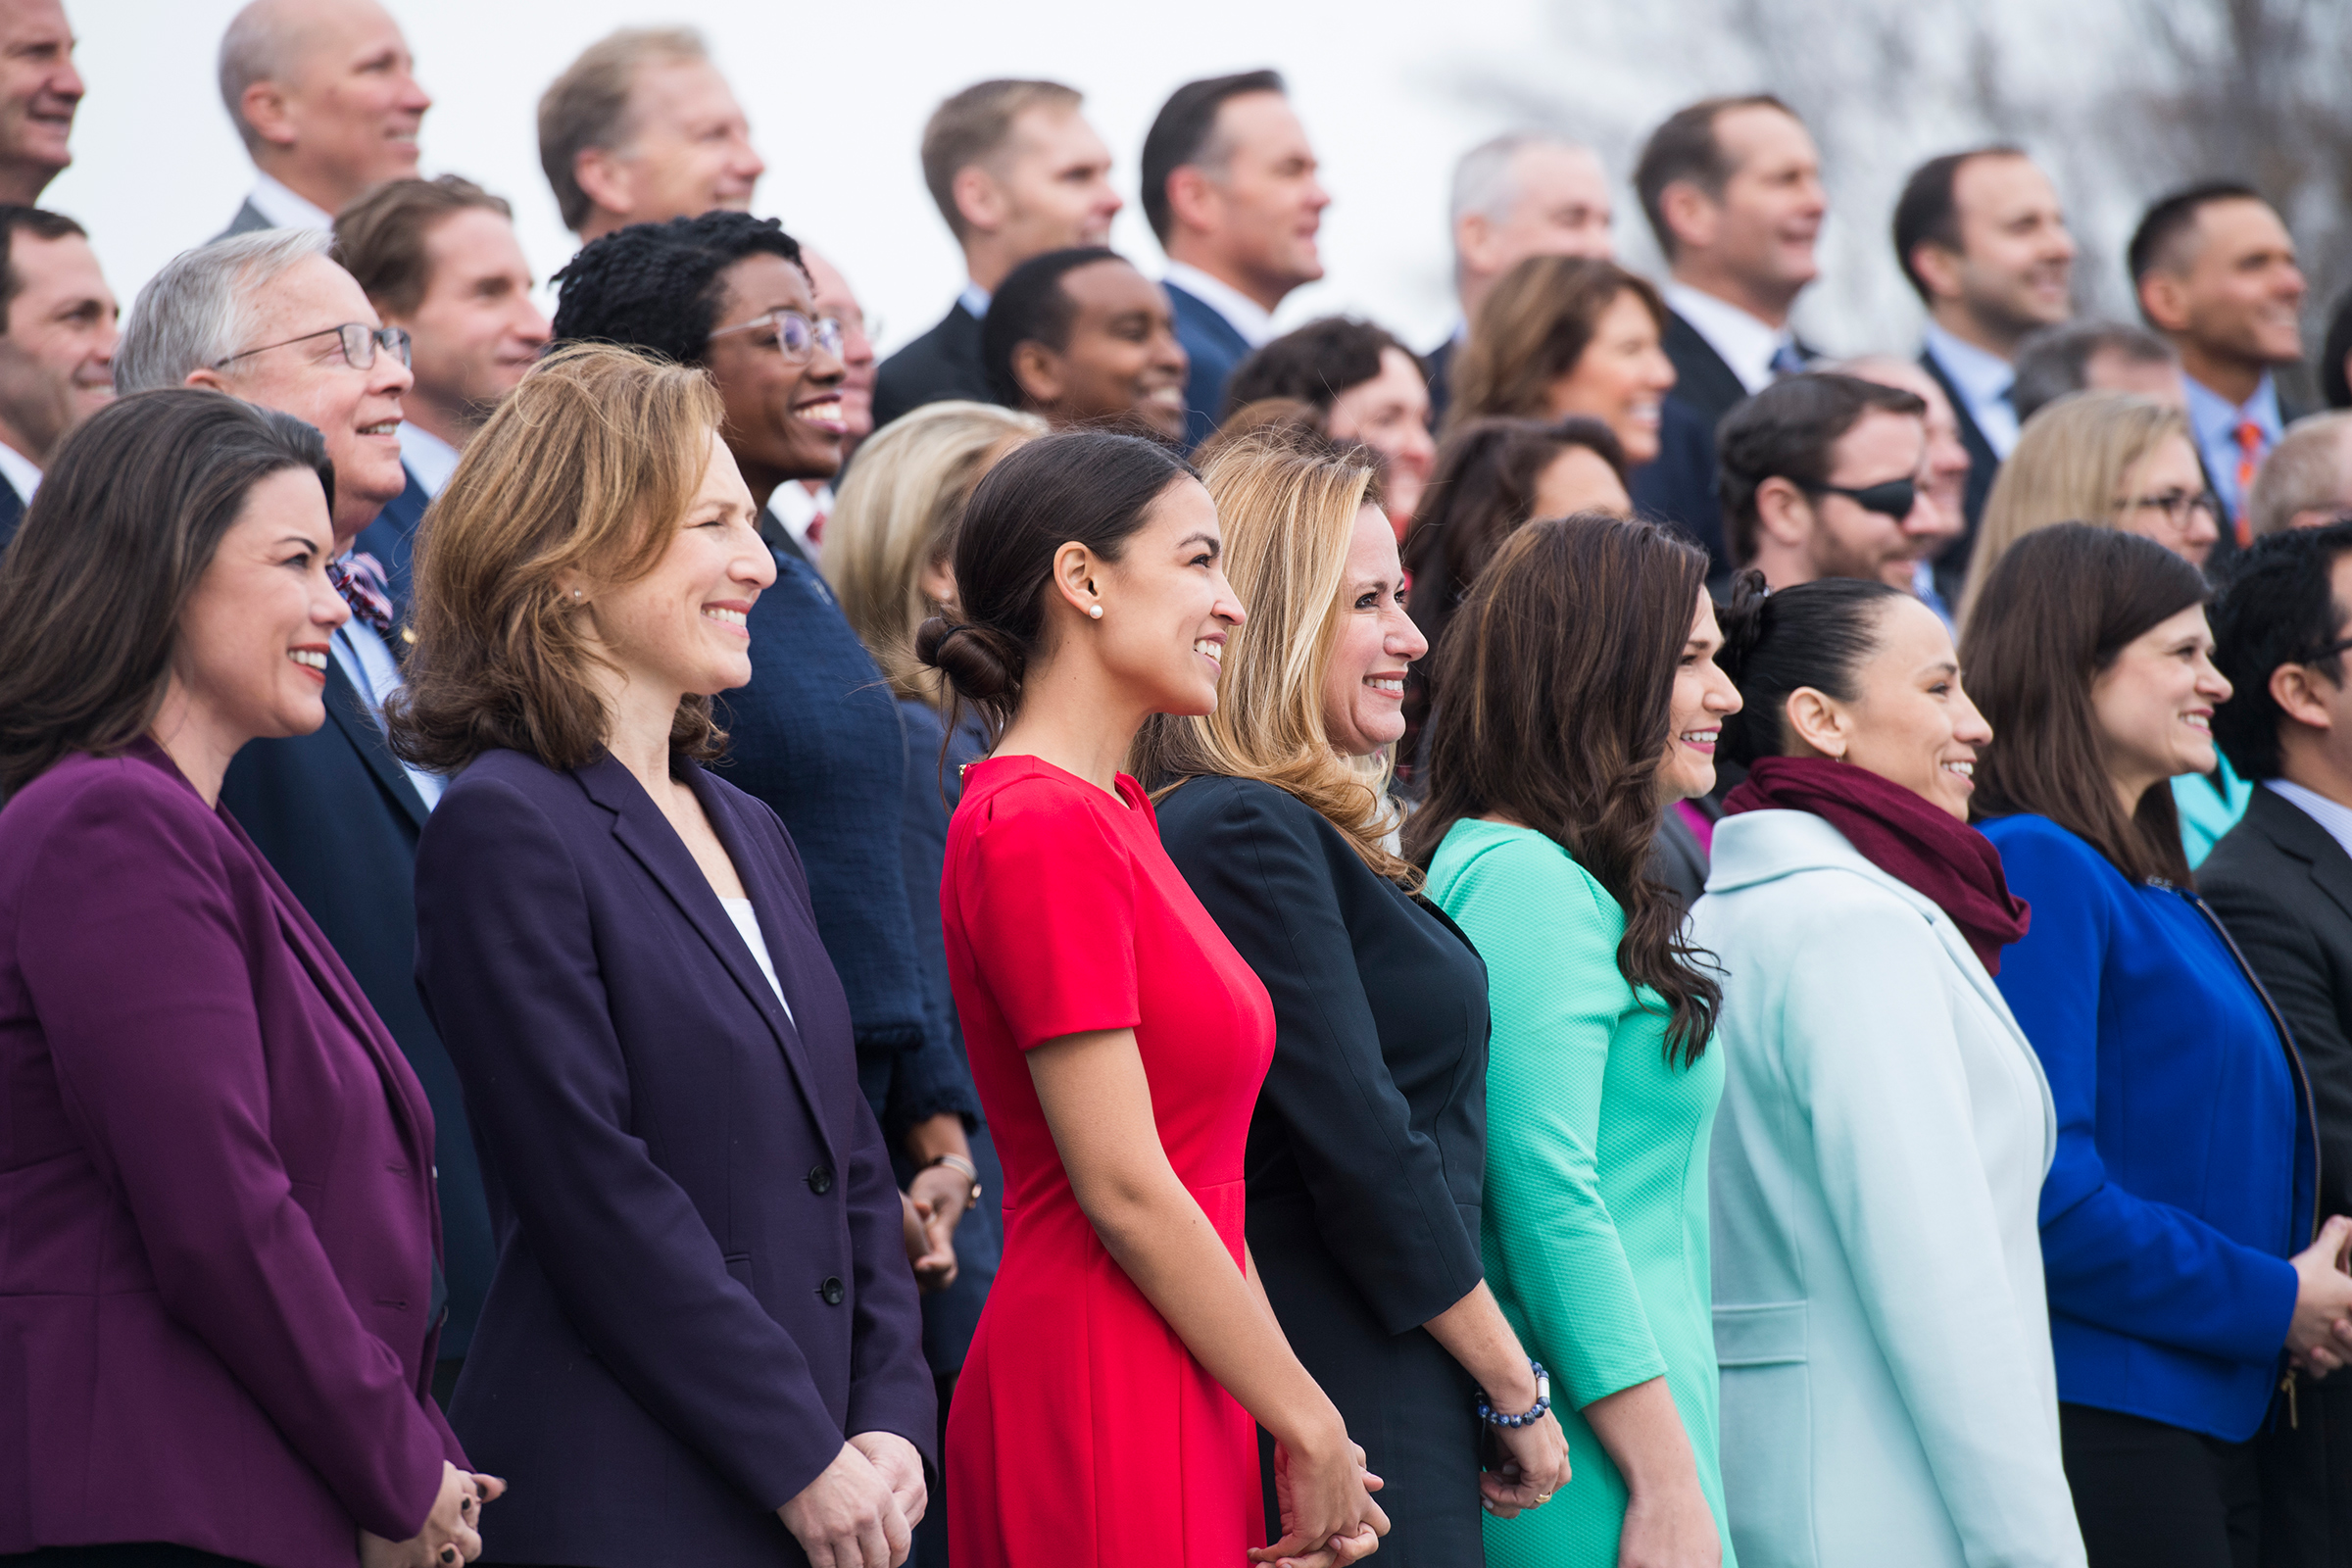 Members-elect including Alexandria Ocasio-Cortez, D-N.Y., pose for the freshman class photo of the 116th Congress on the East Front of the Capitol on Nov. 14, 2018 (Tom Williams—CQ Roll Call/Getty Images)